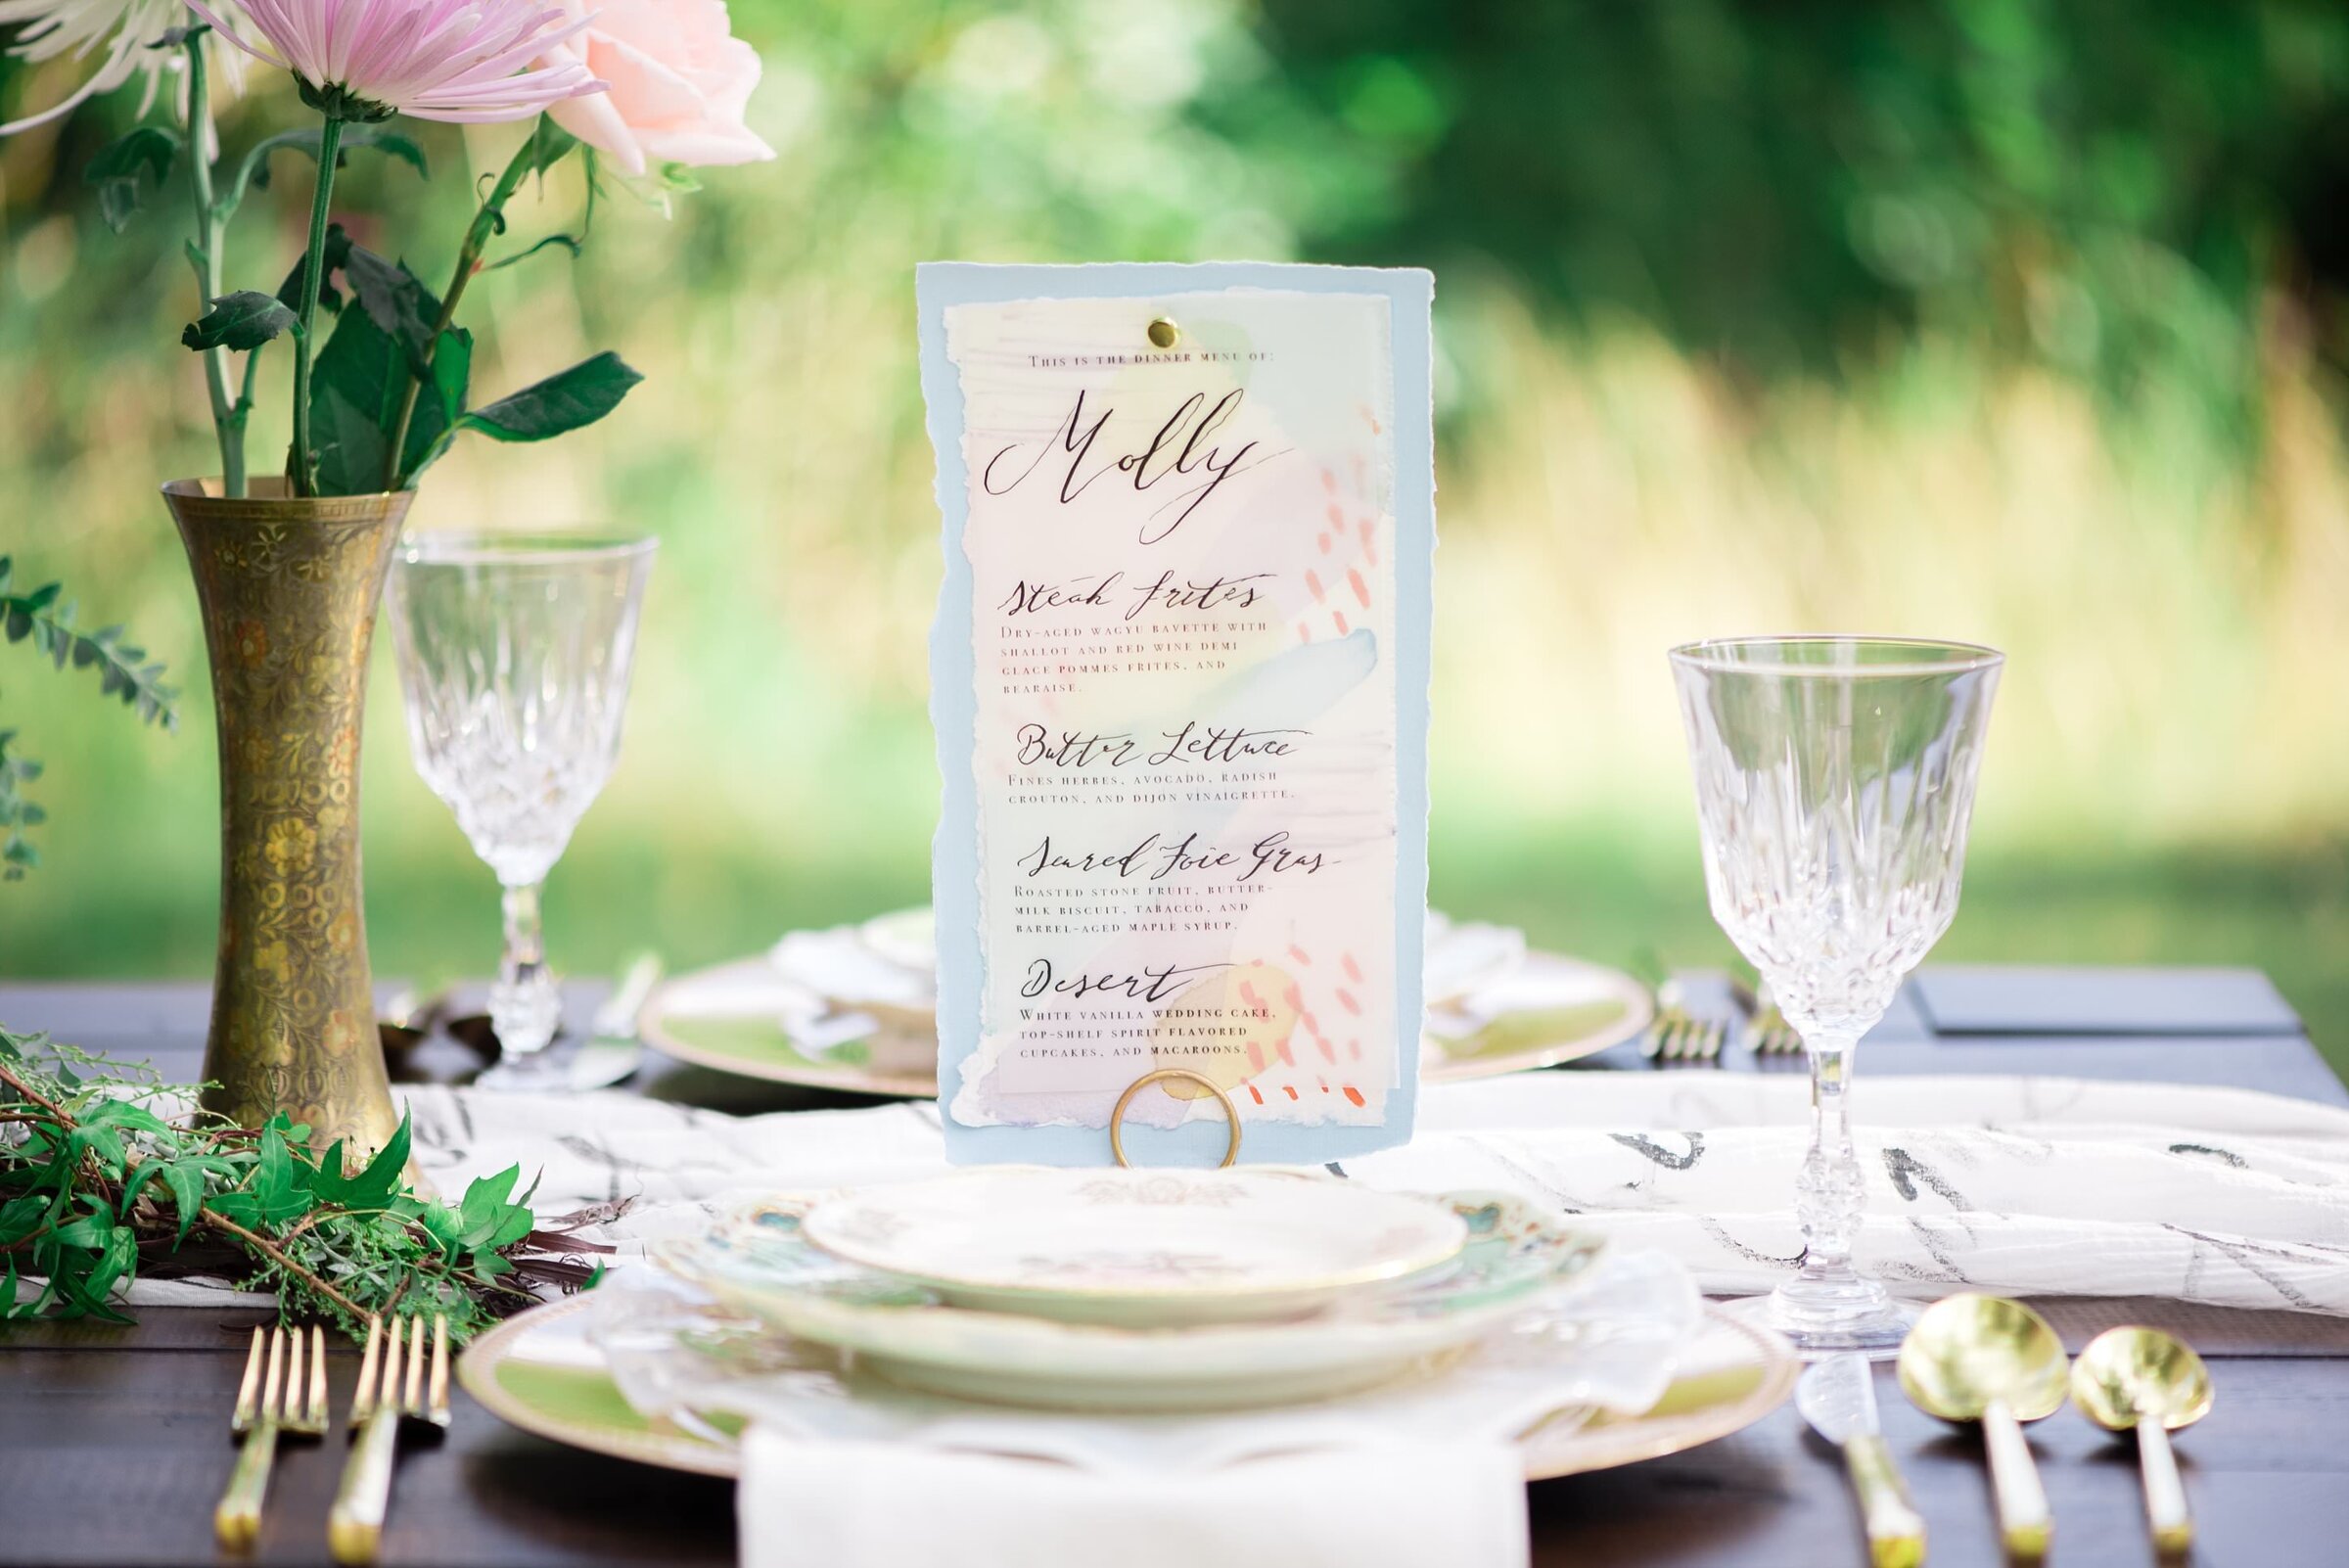 Menu cards with watercolor and hand calligraphy standing upright on vintage china, soft blue, pinks and gold design details